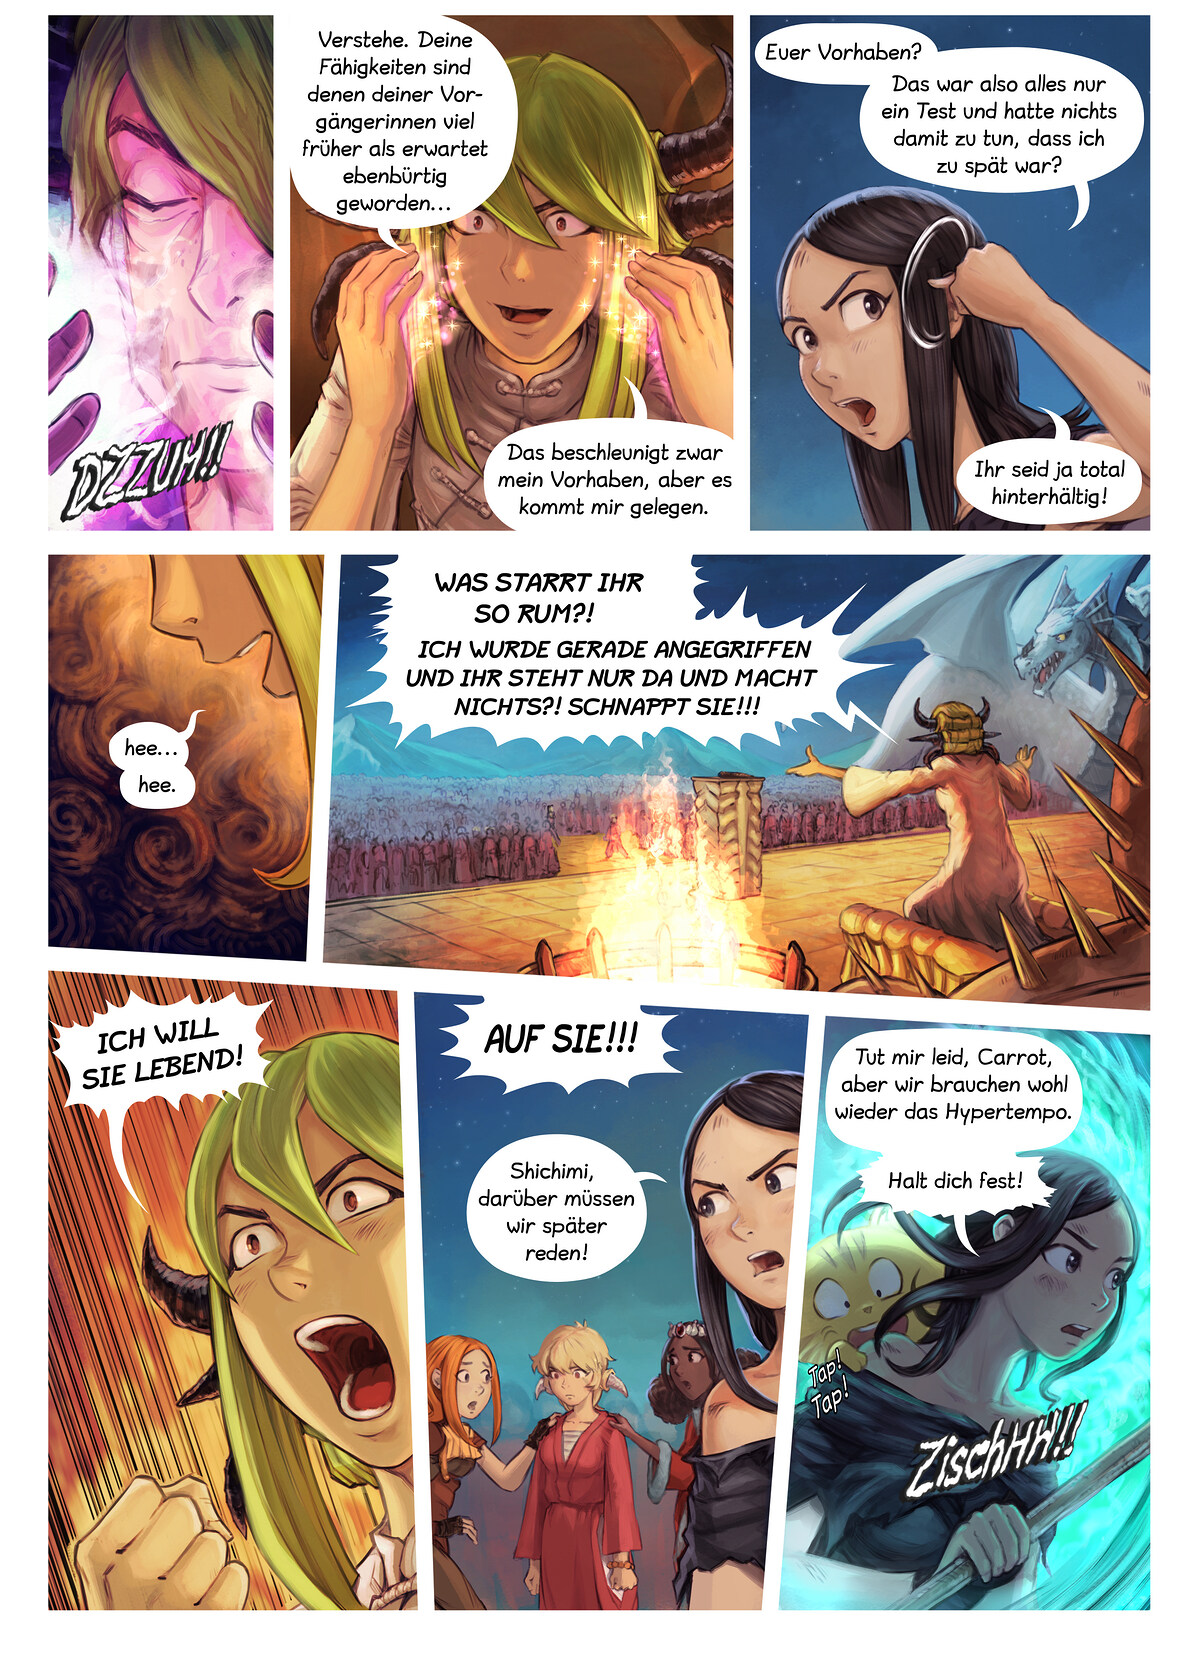 Episode 34: Shichimis Abschluss, Page 9